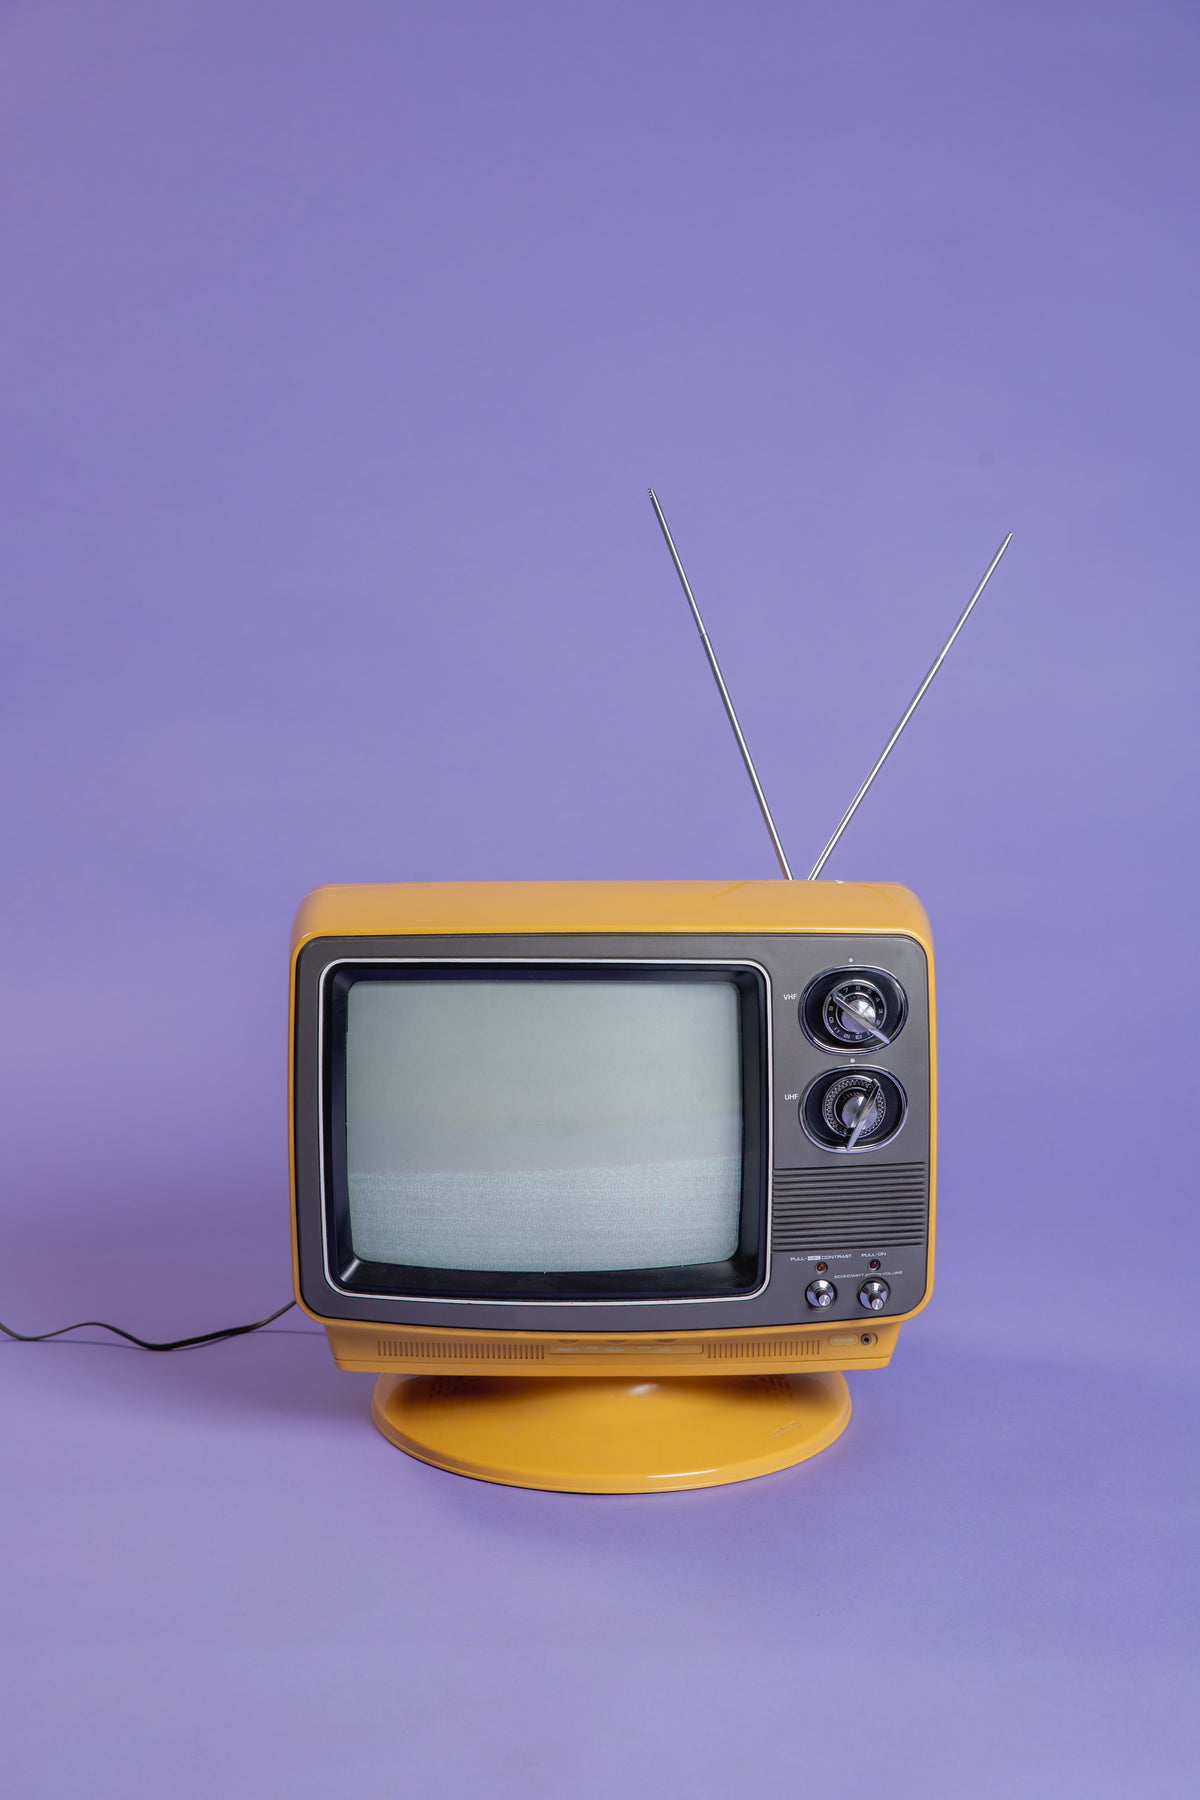 plugged in vintage tv on purple infinity background